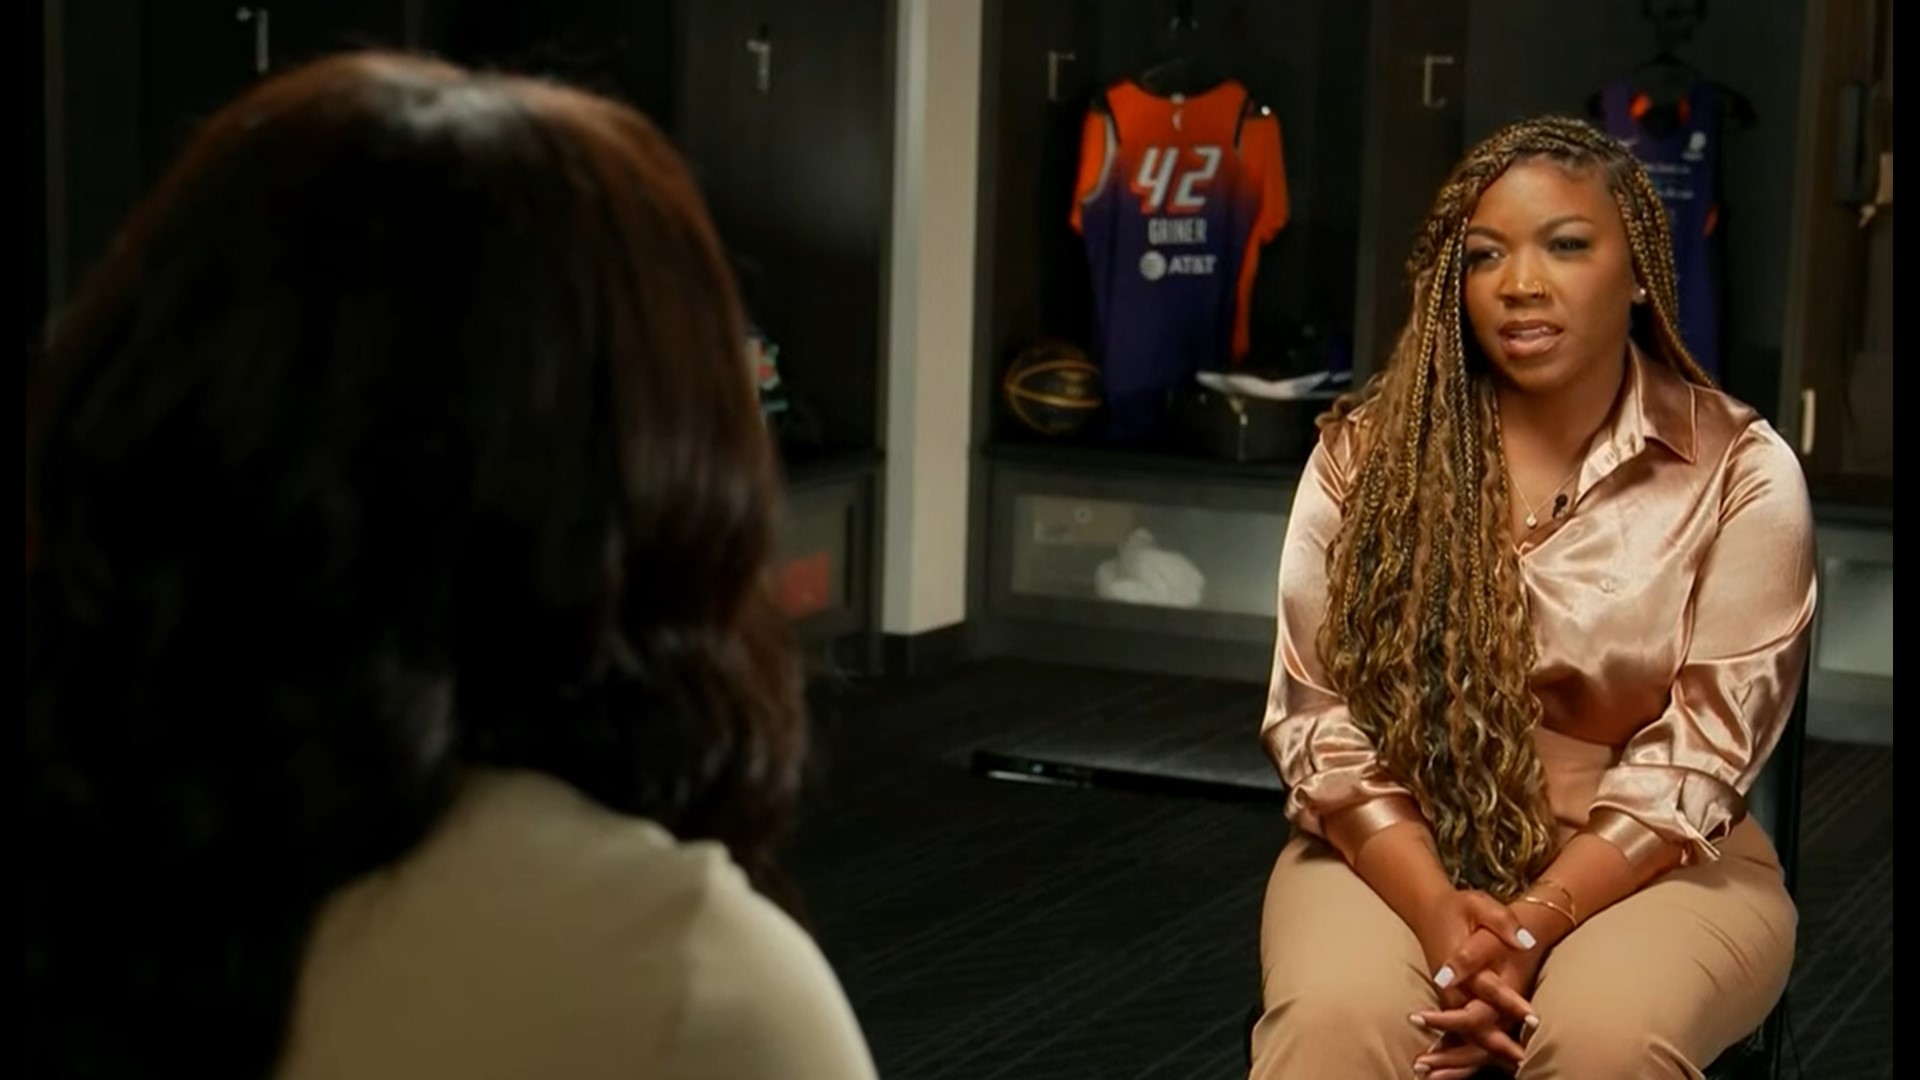 Cherelle Griner sat down with CNN ahead of Friday's court date in Russia for Brittney. (Video/CNN)